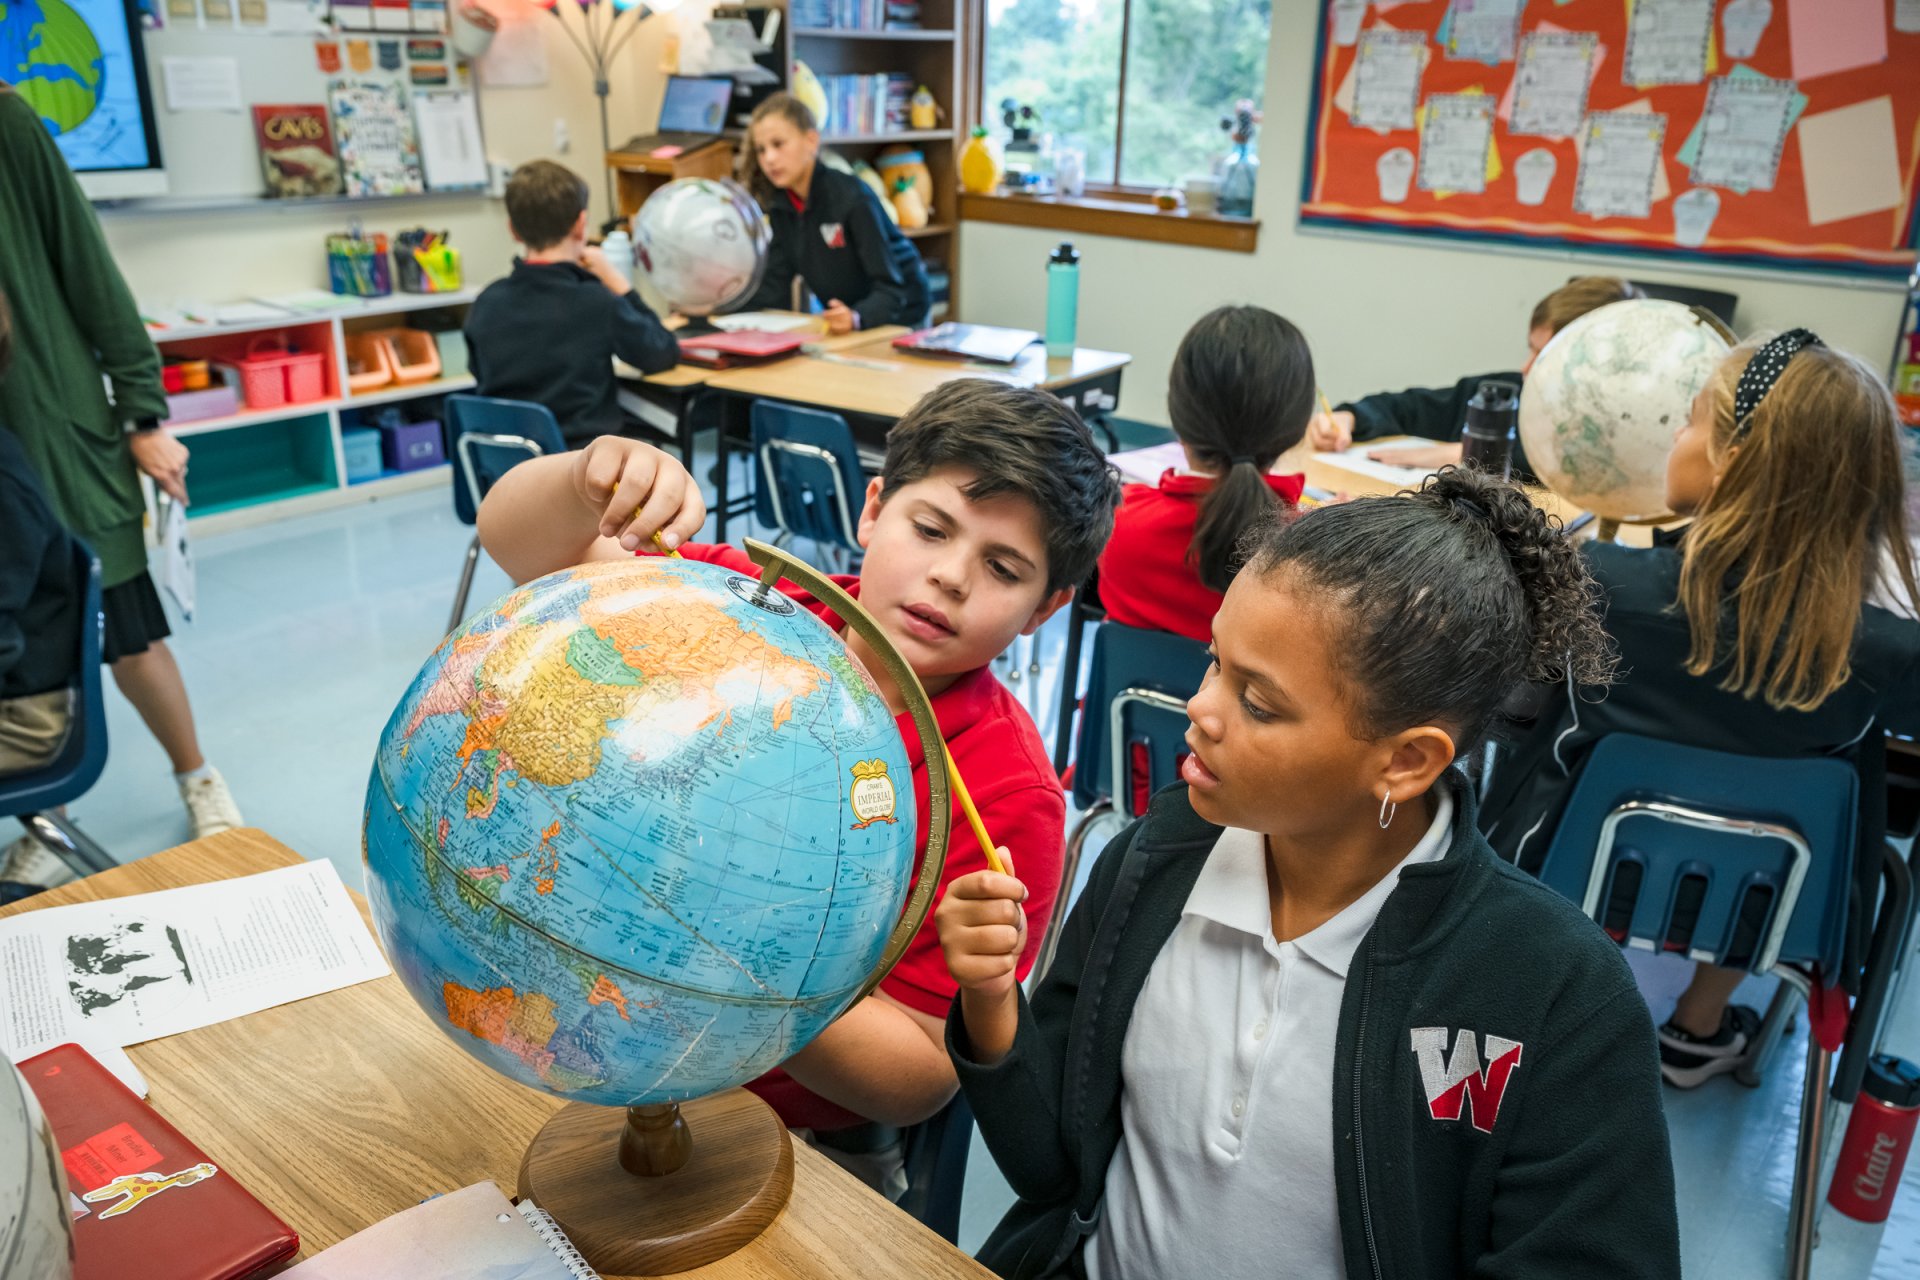 5th grade students using a globe to map geographical locations